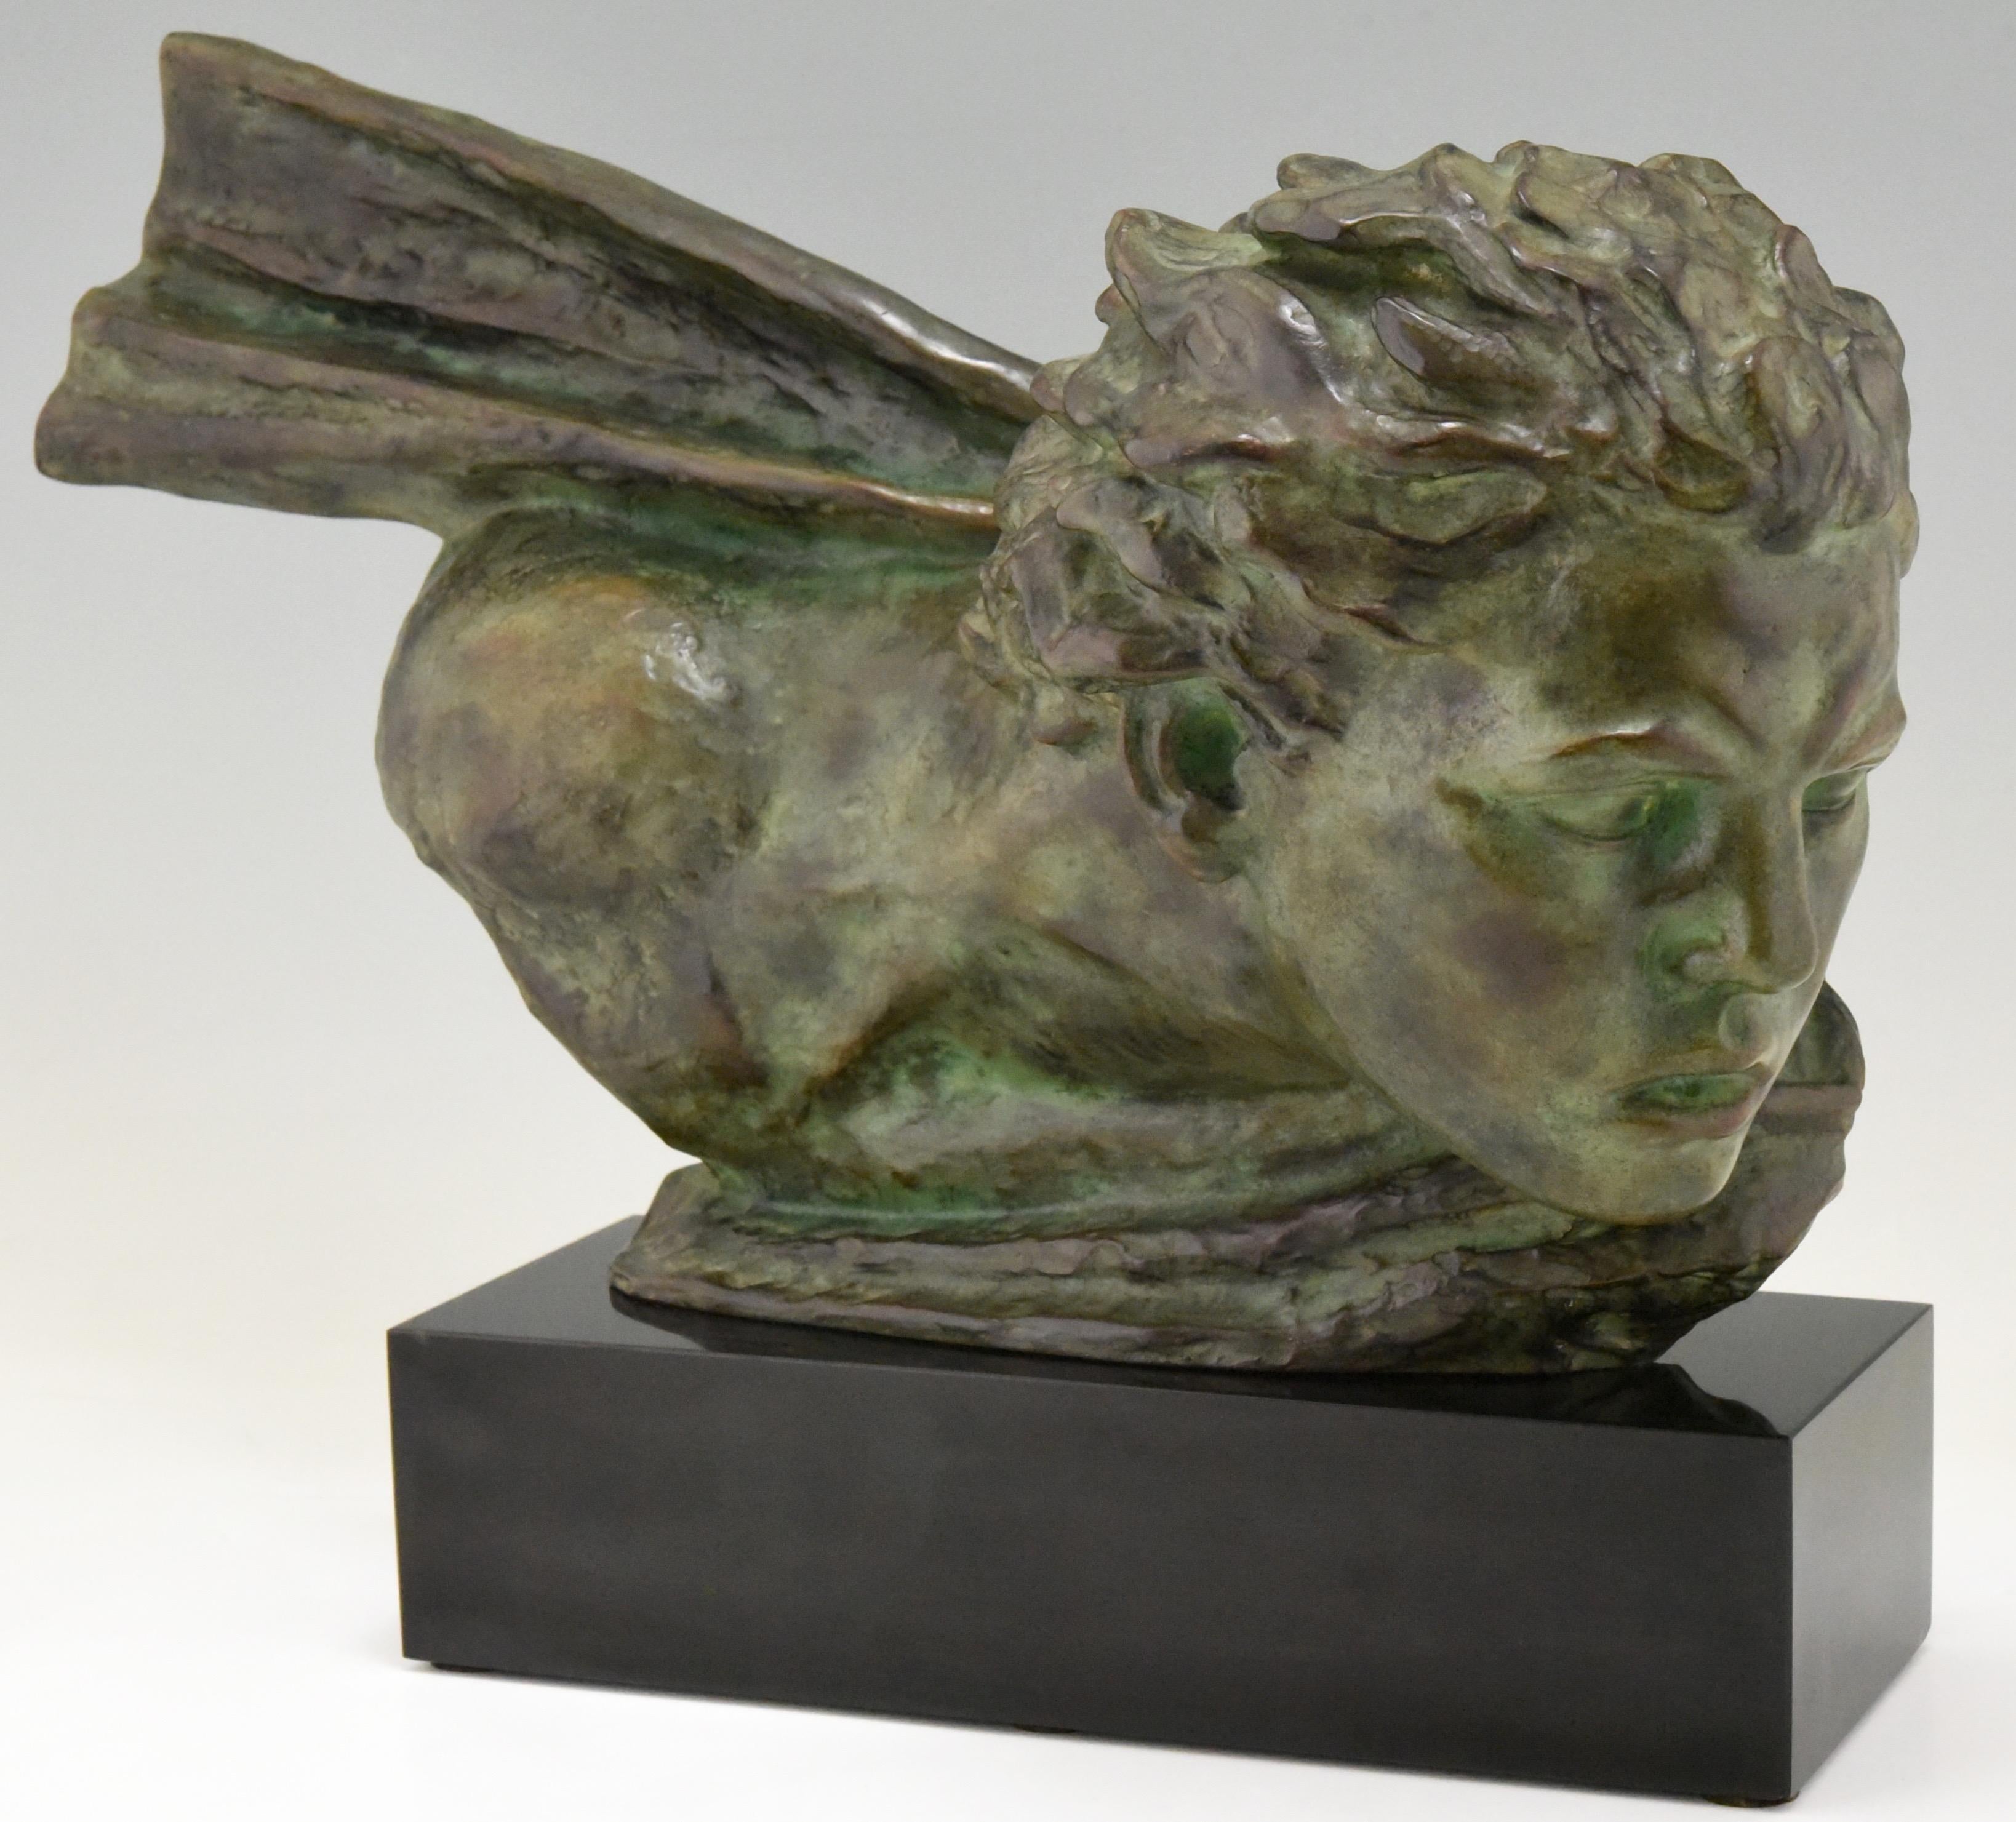 Art Deco bronze sculpture, bust of the famous French aviator and hero Jean Mermoz who lived from 1901 until 1930.
The sculpture is signed by Alexandre Kelety and has the Patroulleau foundry mark. Stamped Bronze.
Beautiful green patina with ligher